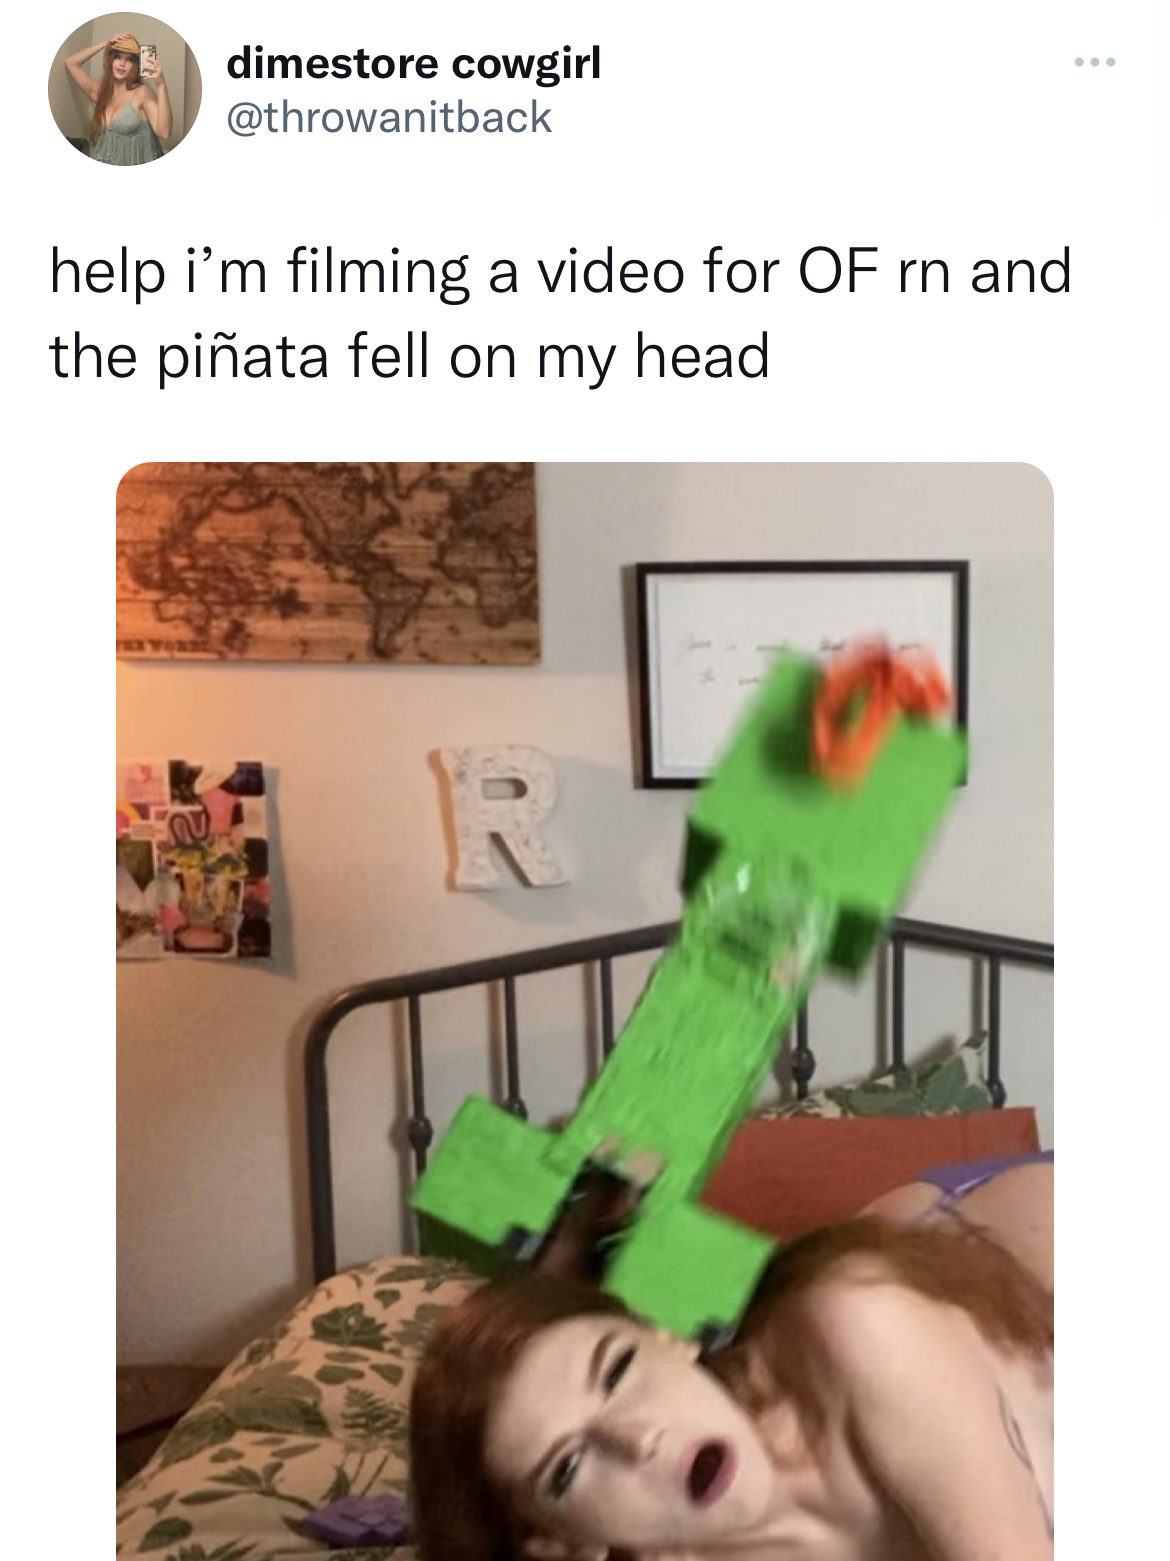 funny and fresh tweets - photo caption - dimestore cowgirl help i'm filming a video for Of rn and the piata fell on my head R